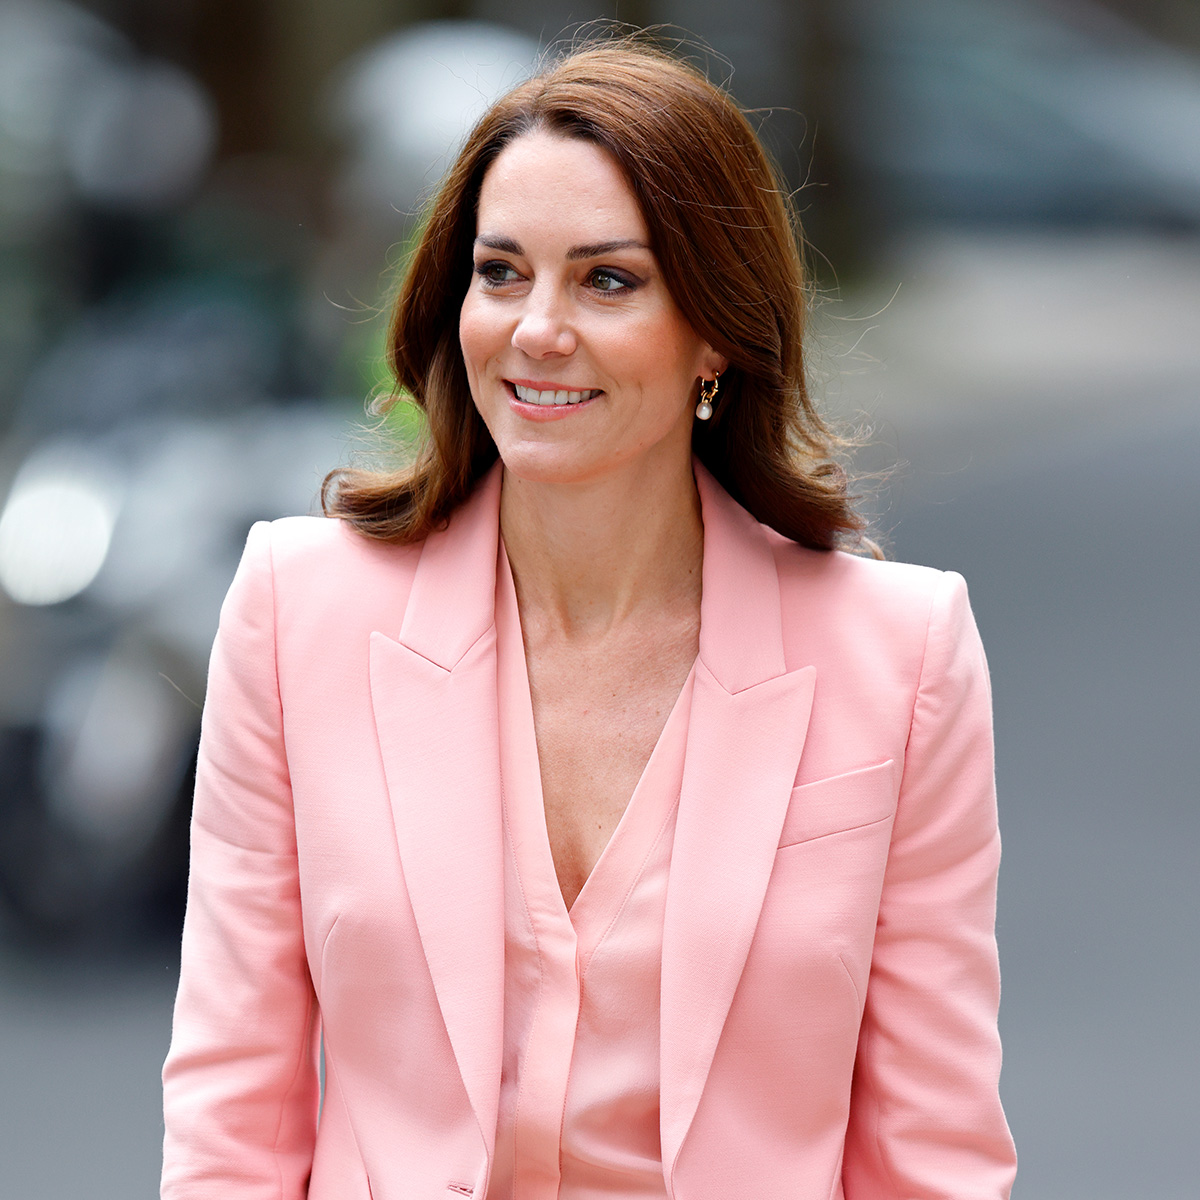 Kate Middleton in Pink Suit & Pearls for London Engagements